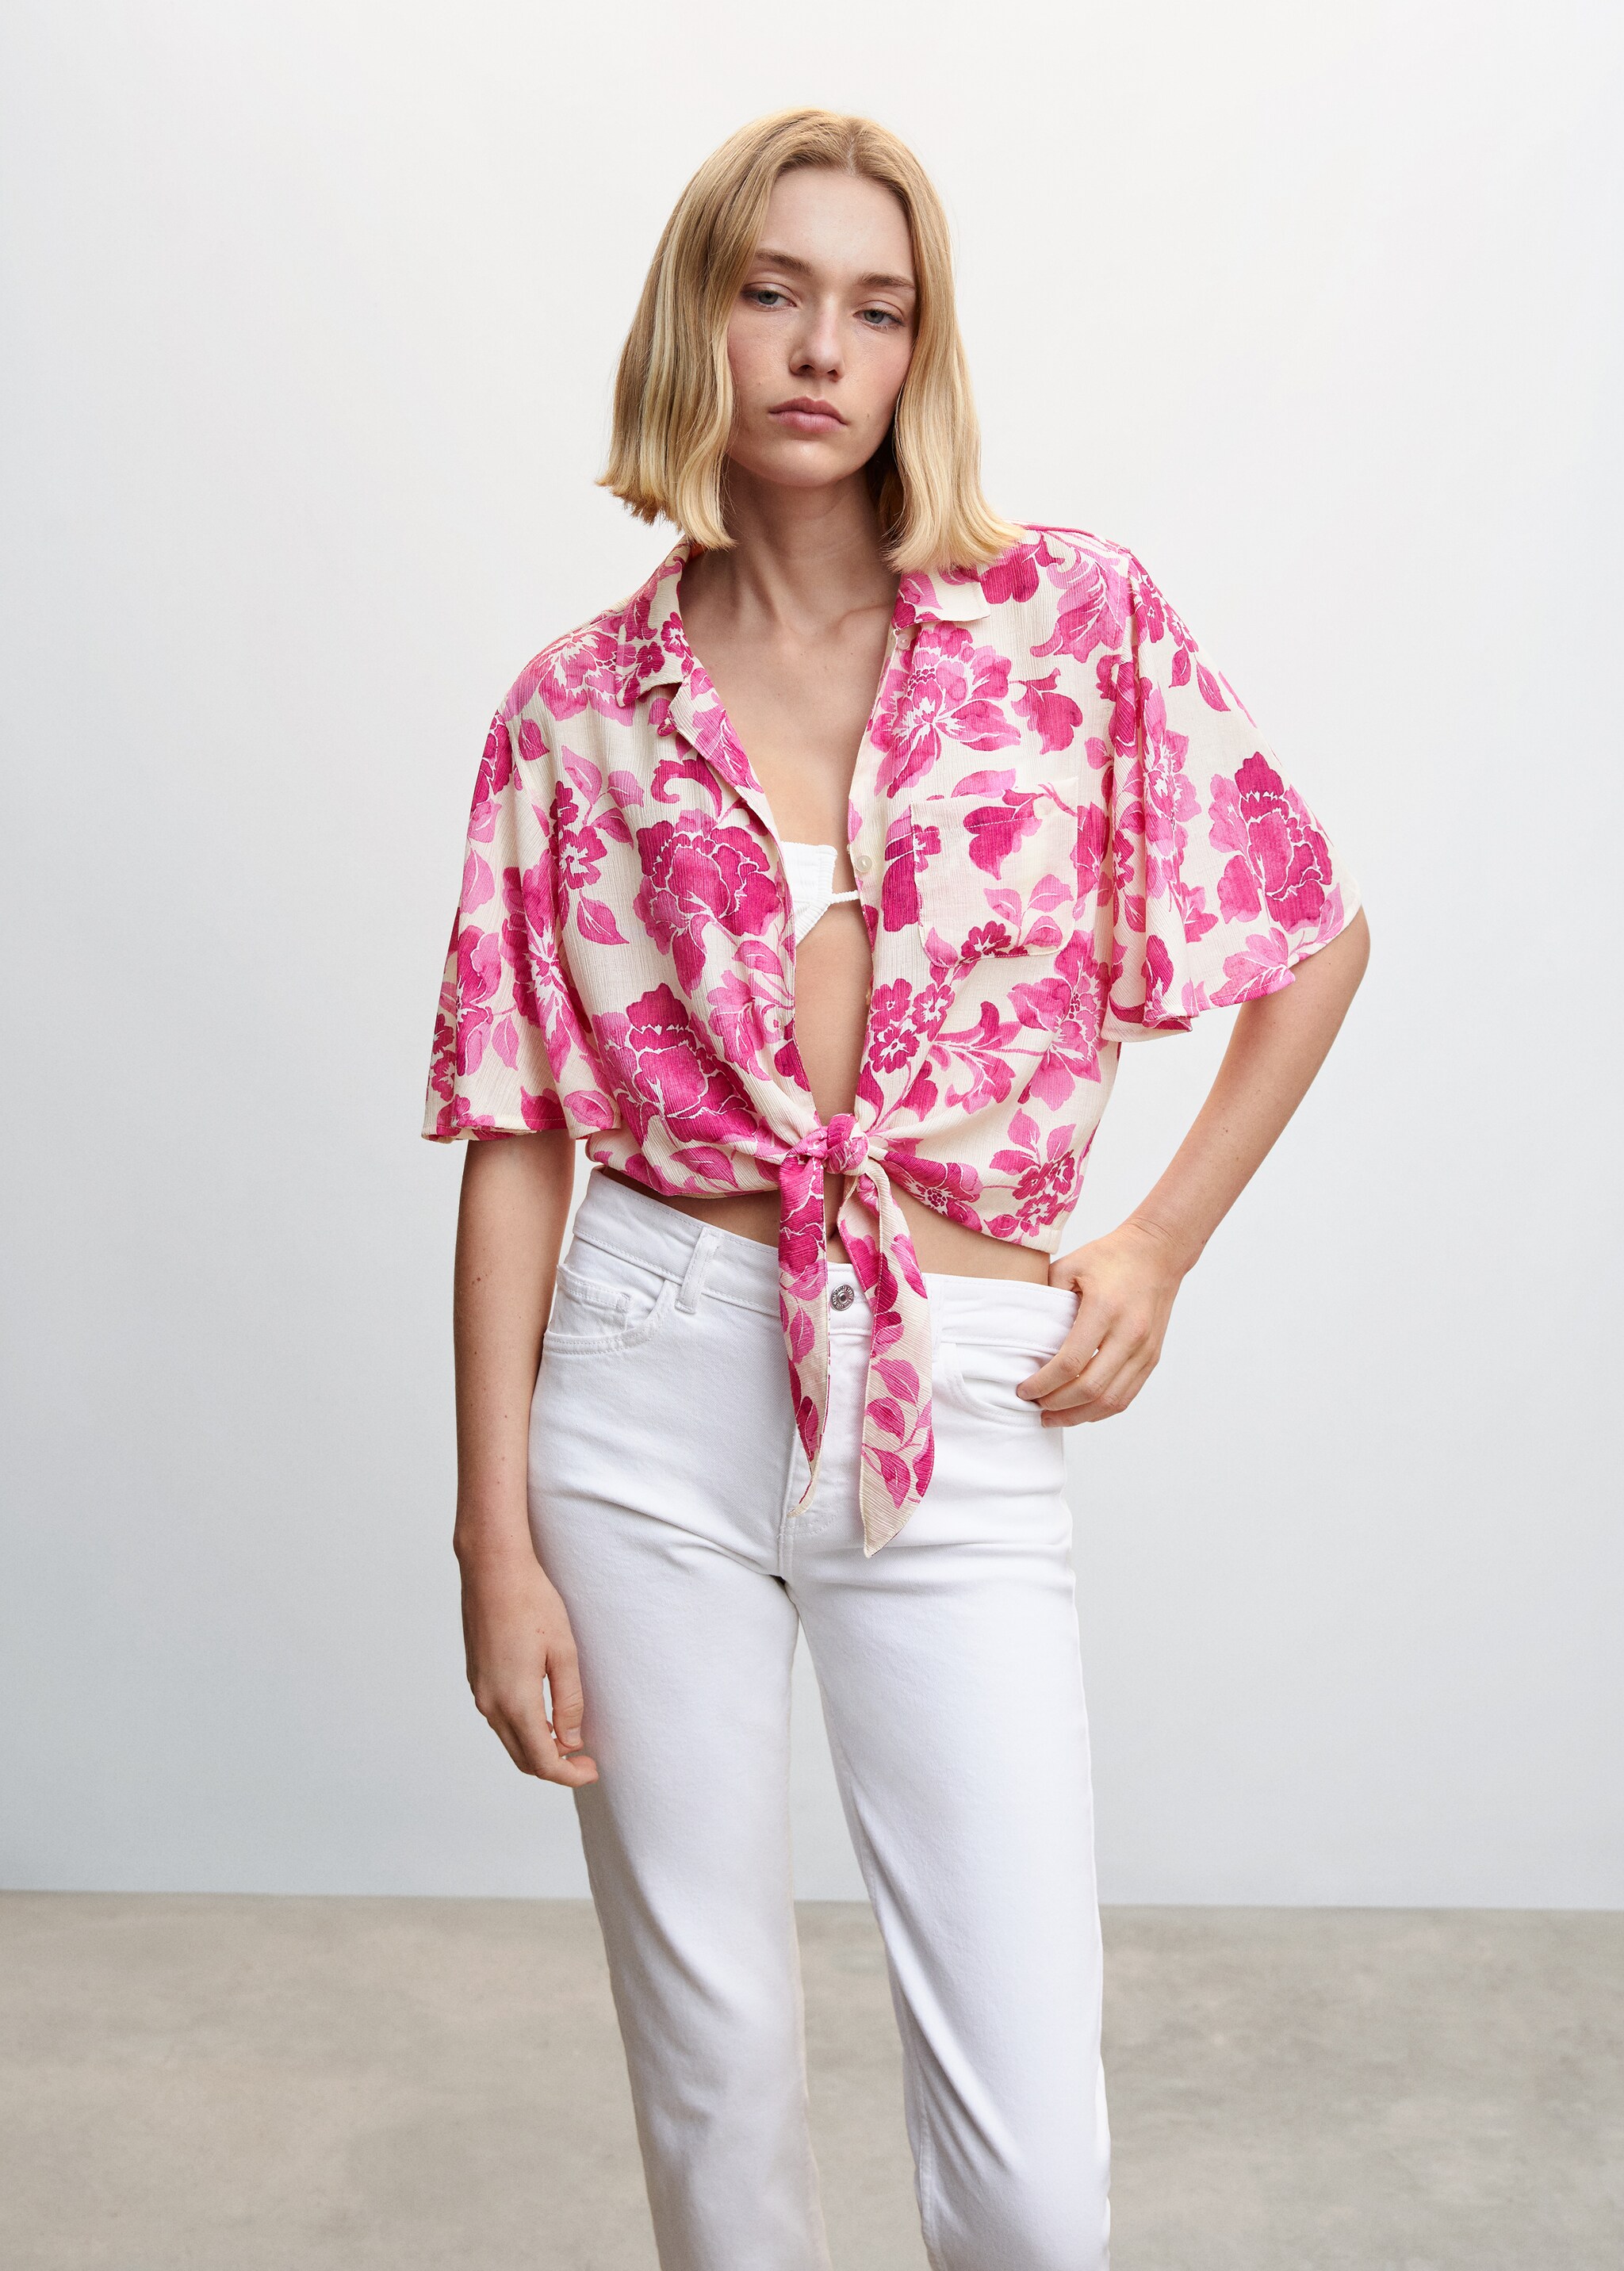 Floral shirt with knot - Medium plane